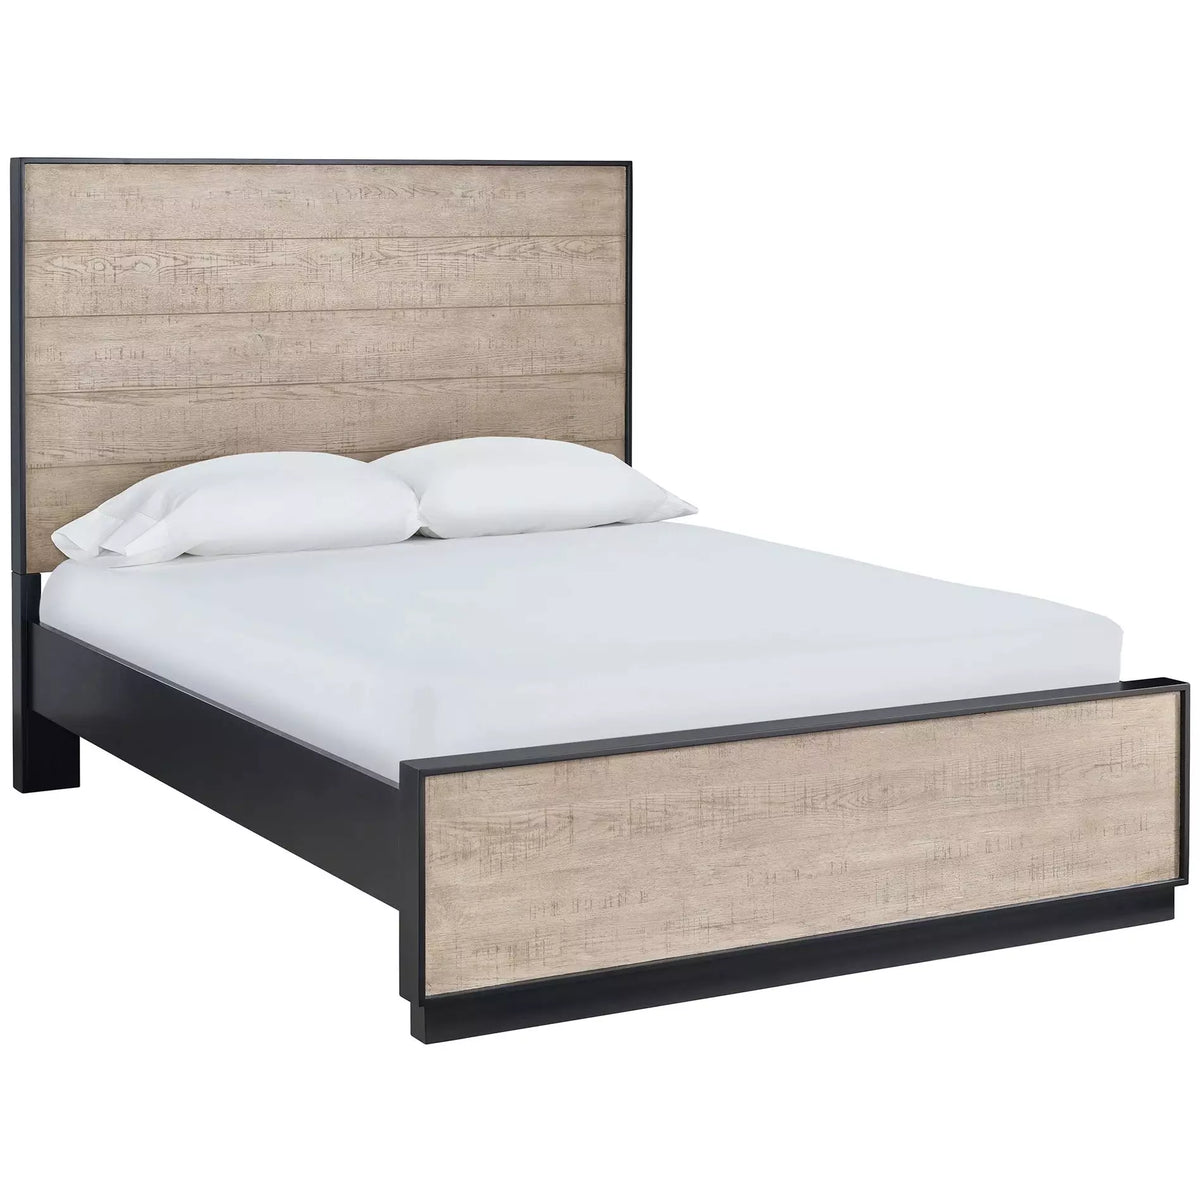 Calloway Bed - Be Bold Furniture